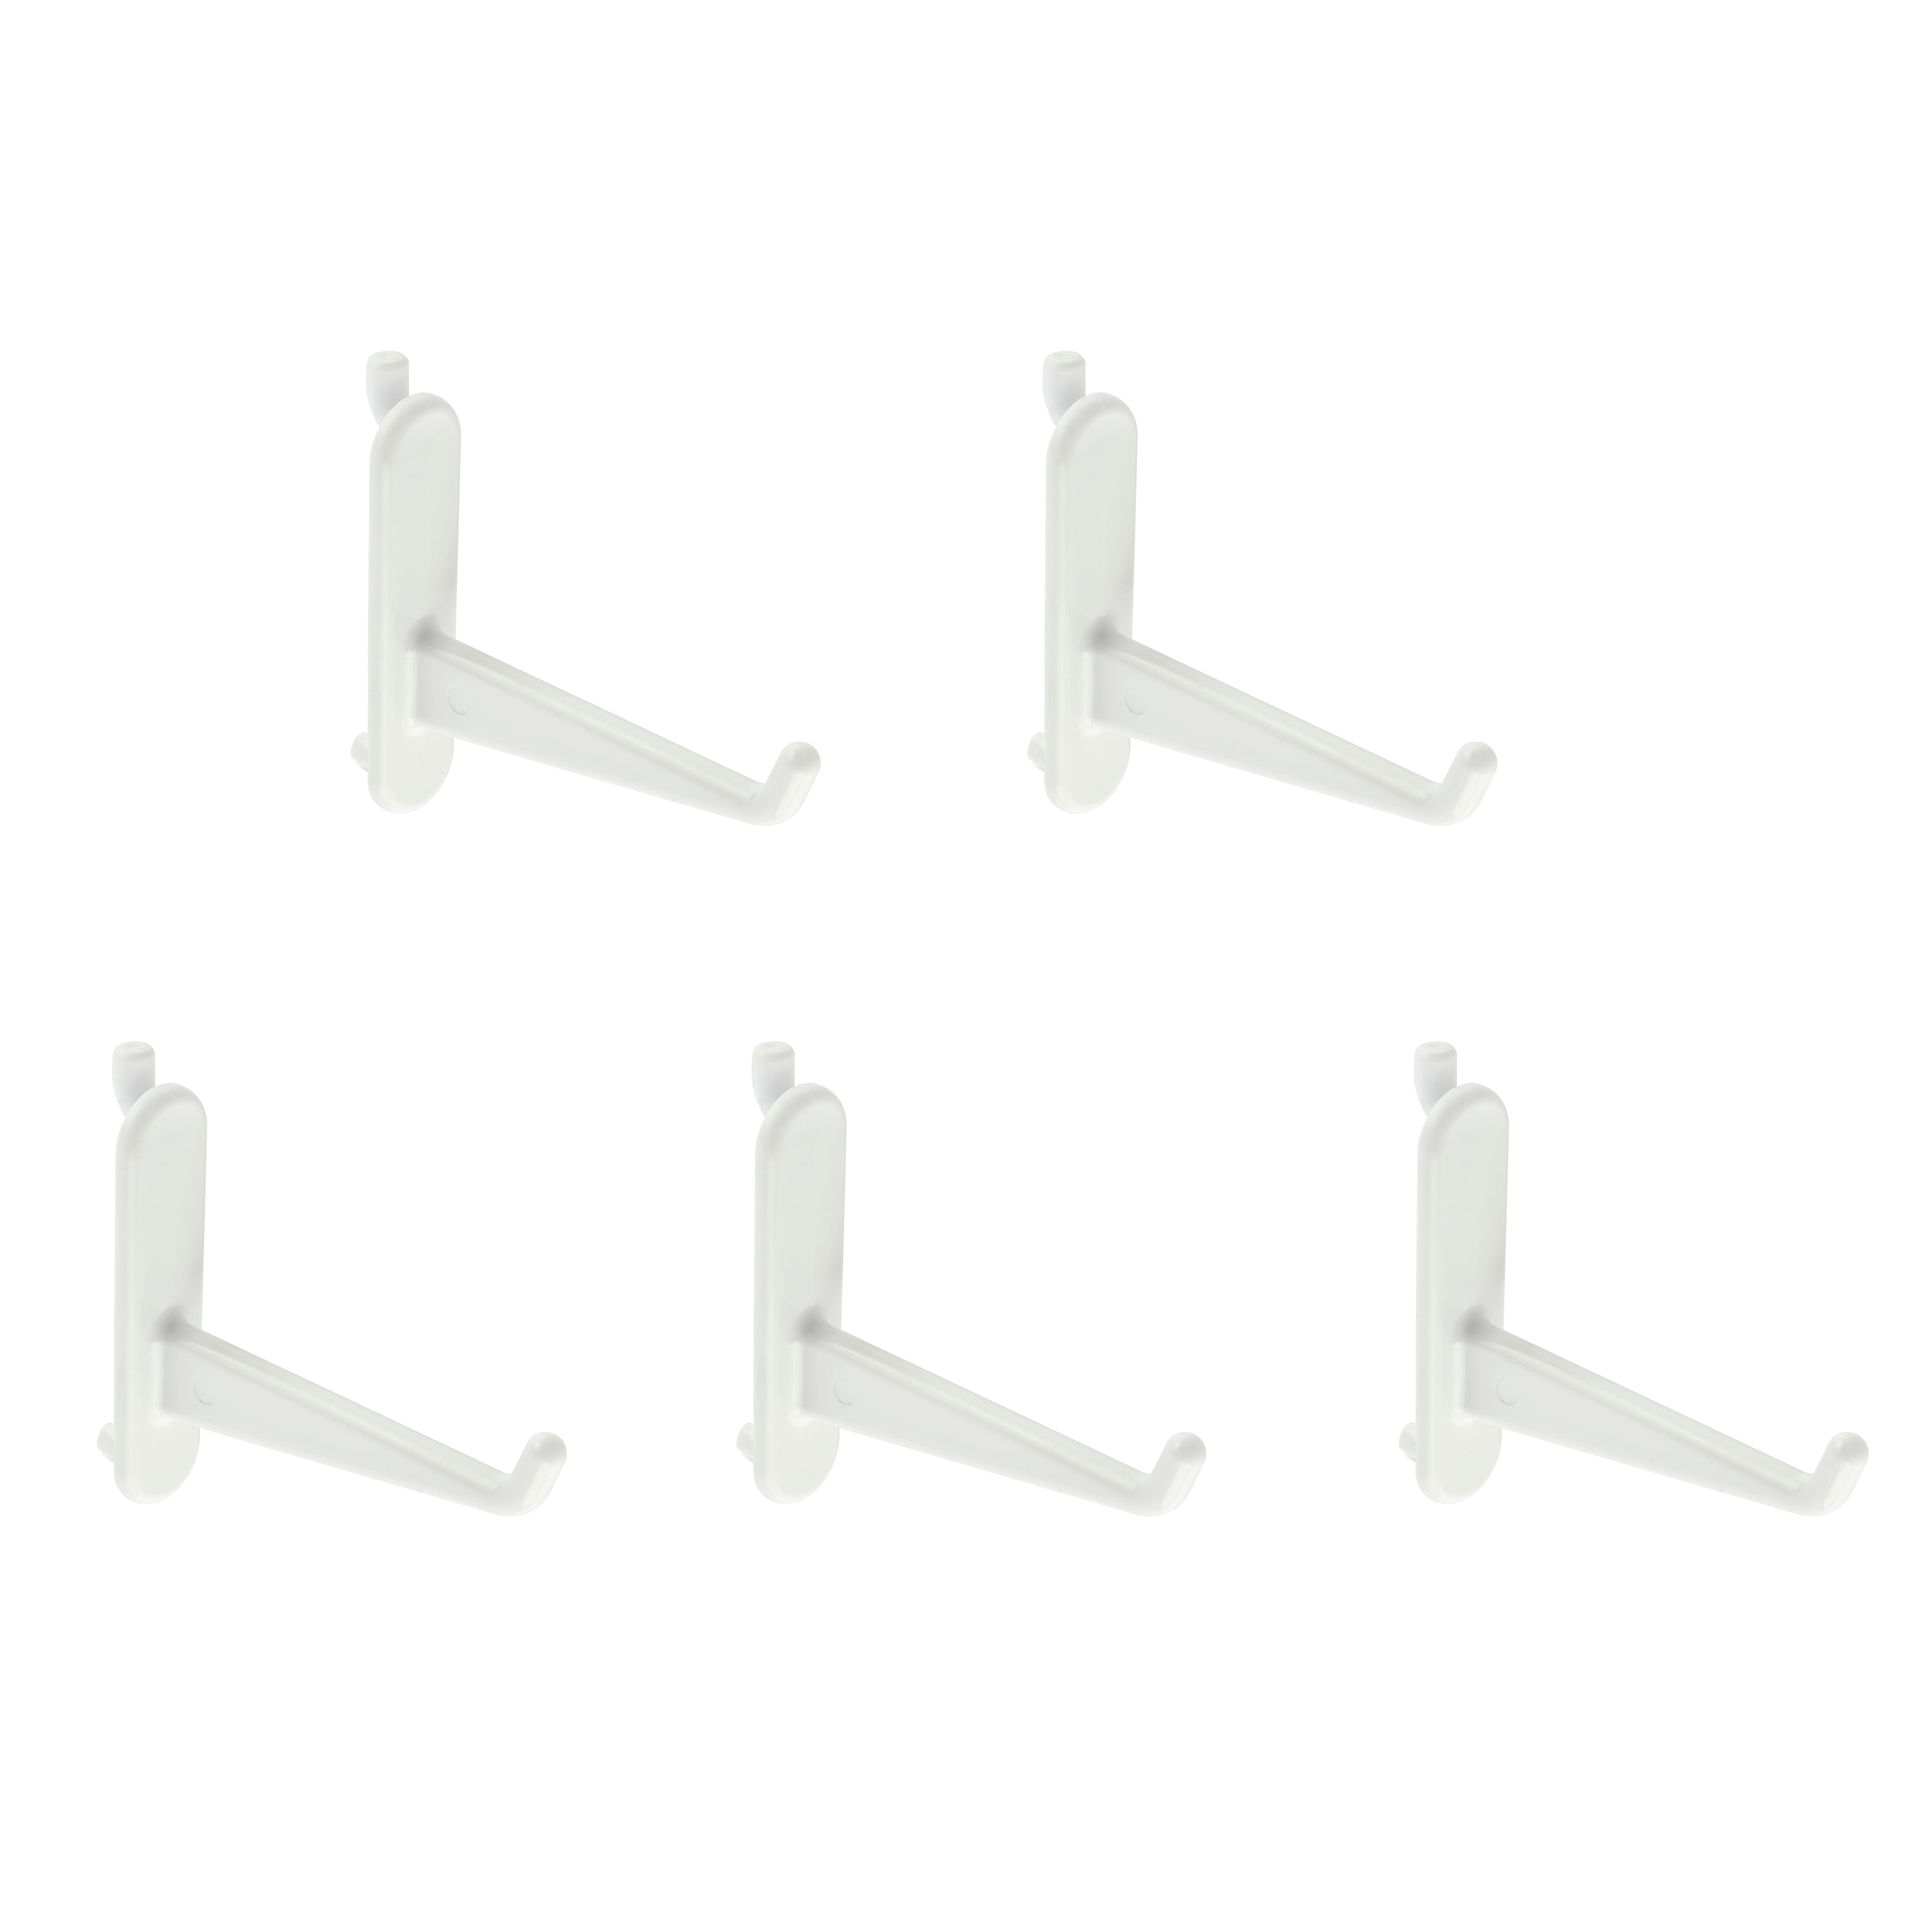 Long White Pegboard Hooks by Simply Tidy®, 5ct.